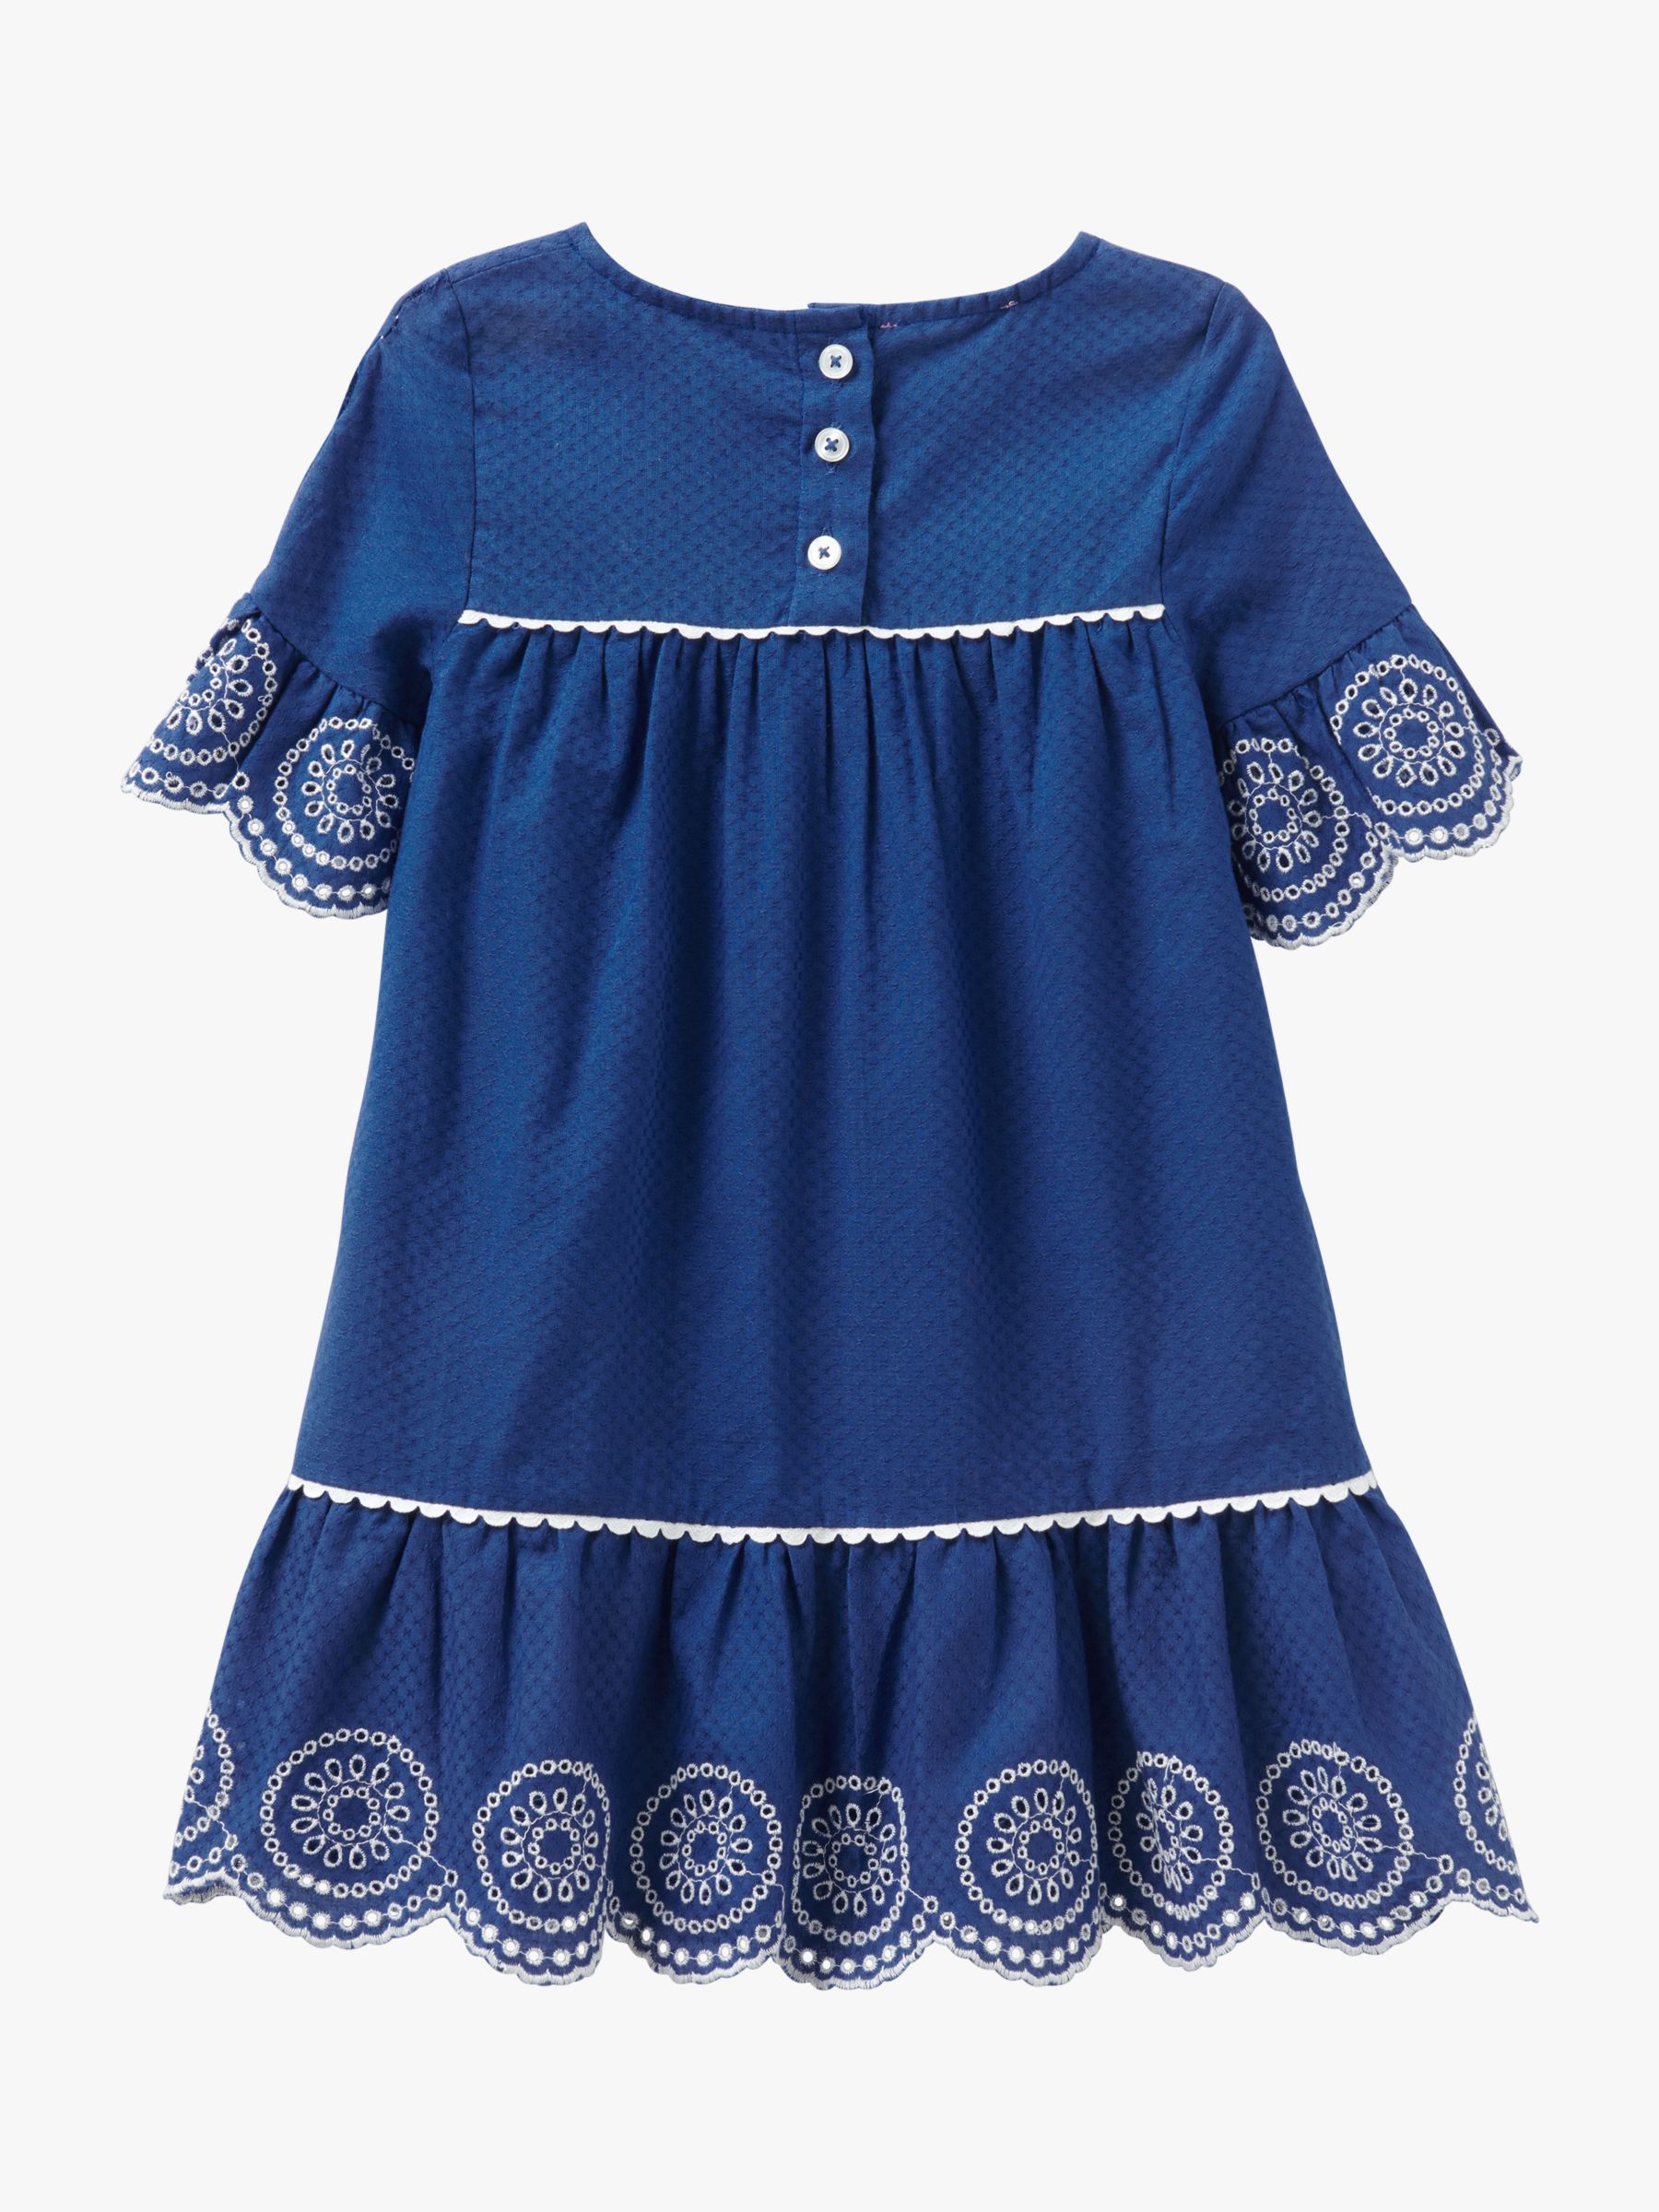 Crew Clothing Kids' Broderie Anglaise Dress, Blue, 6-7 years